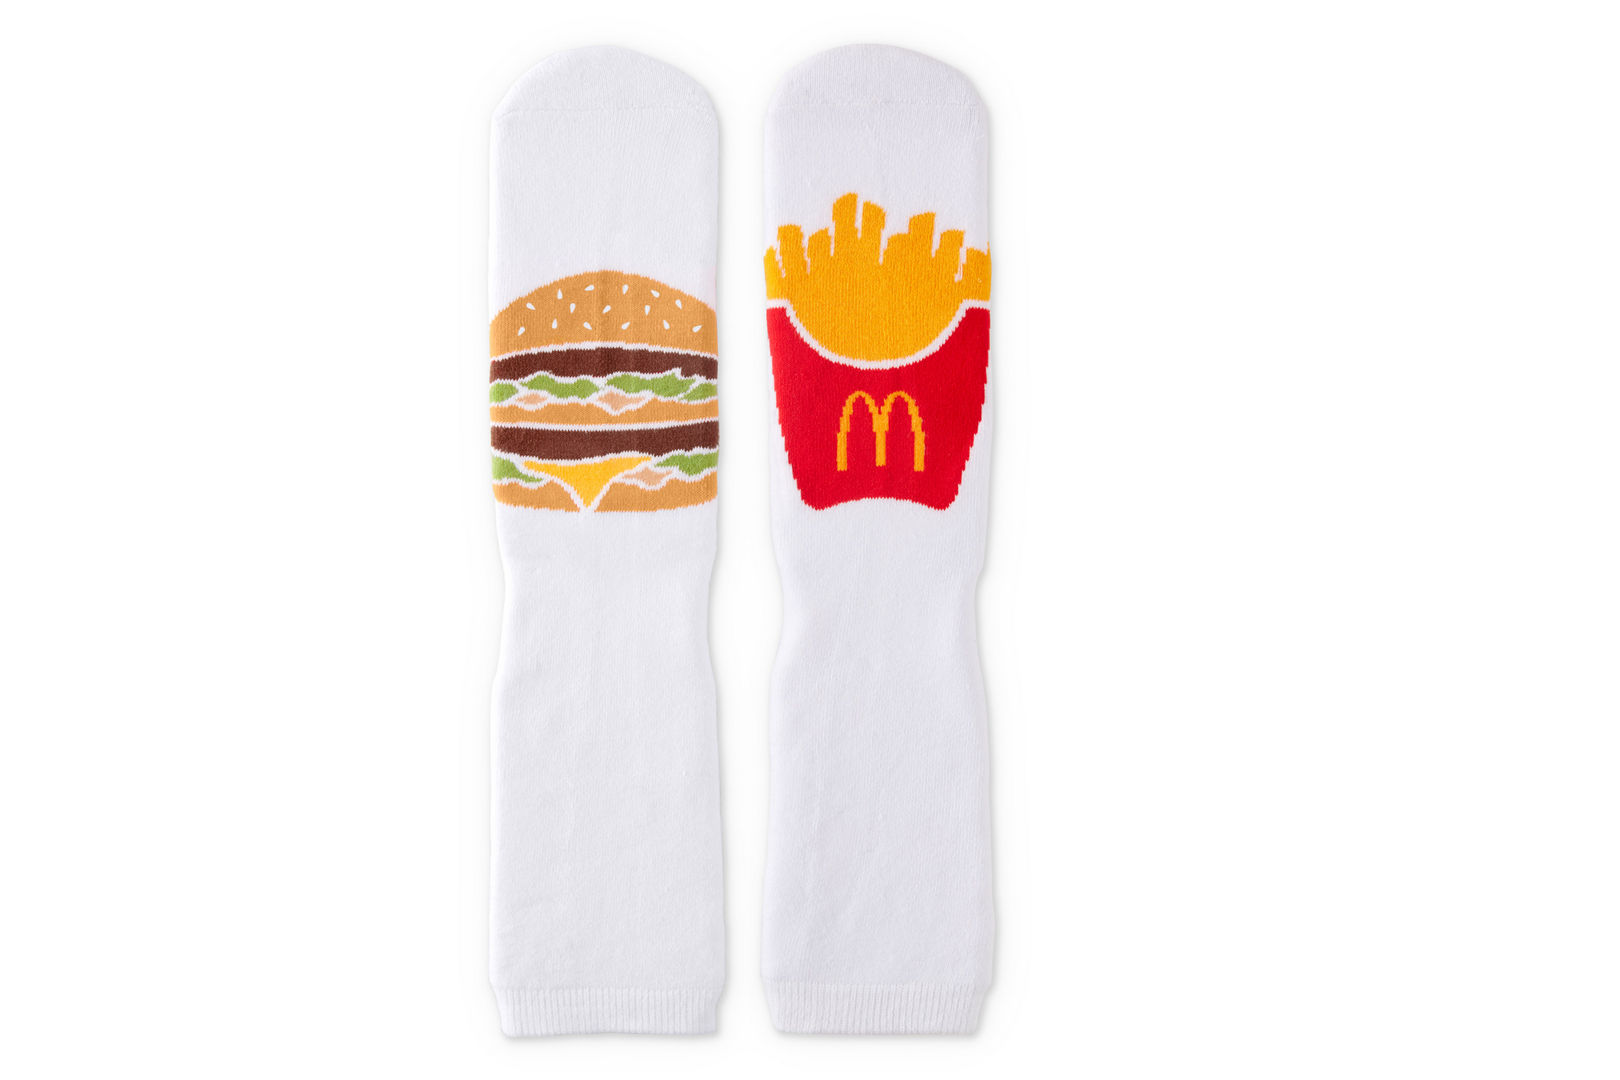 Mcdonalds Limited Edition Colombia Rappi Delivery Promo Big Mac Fries Socks 